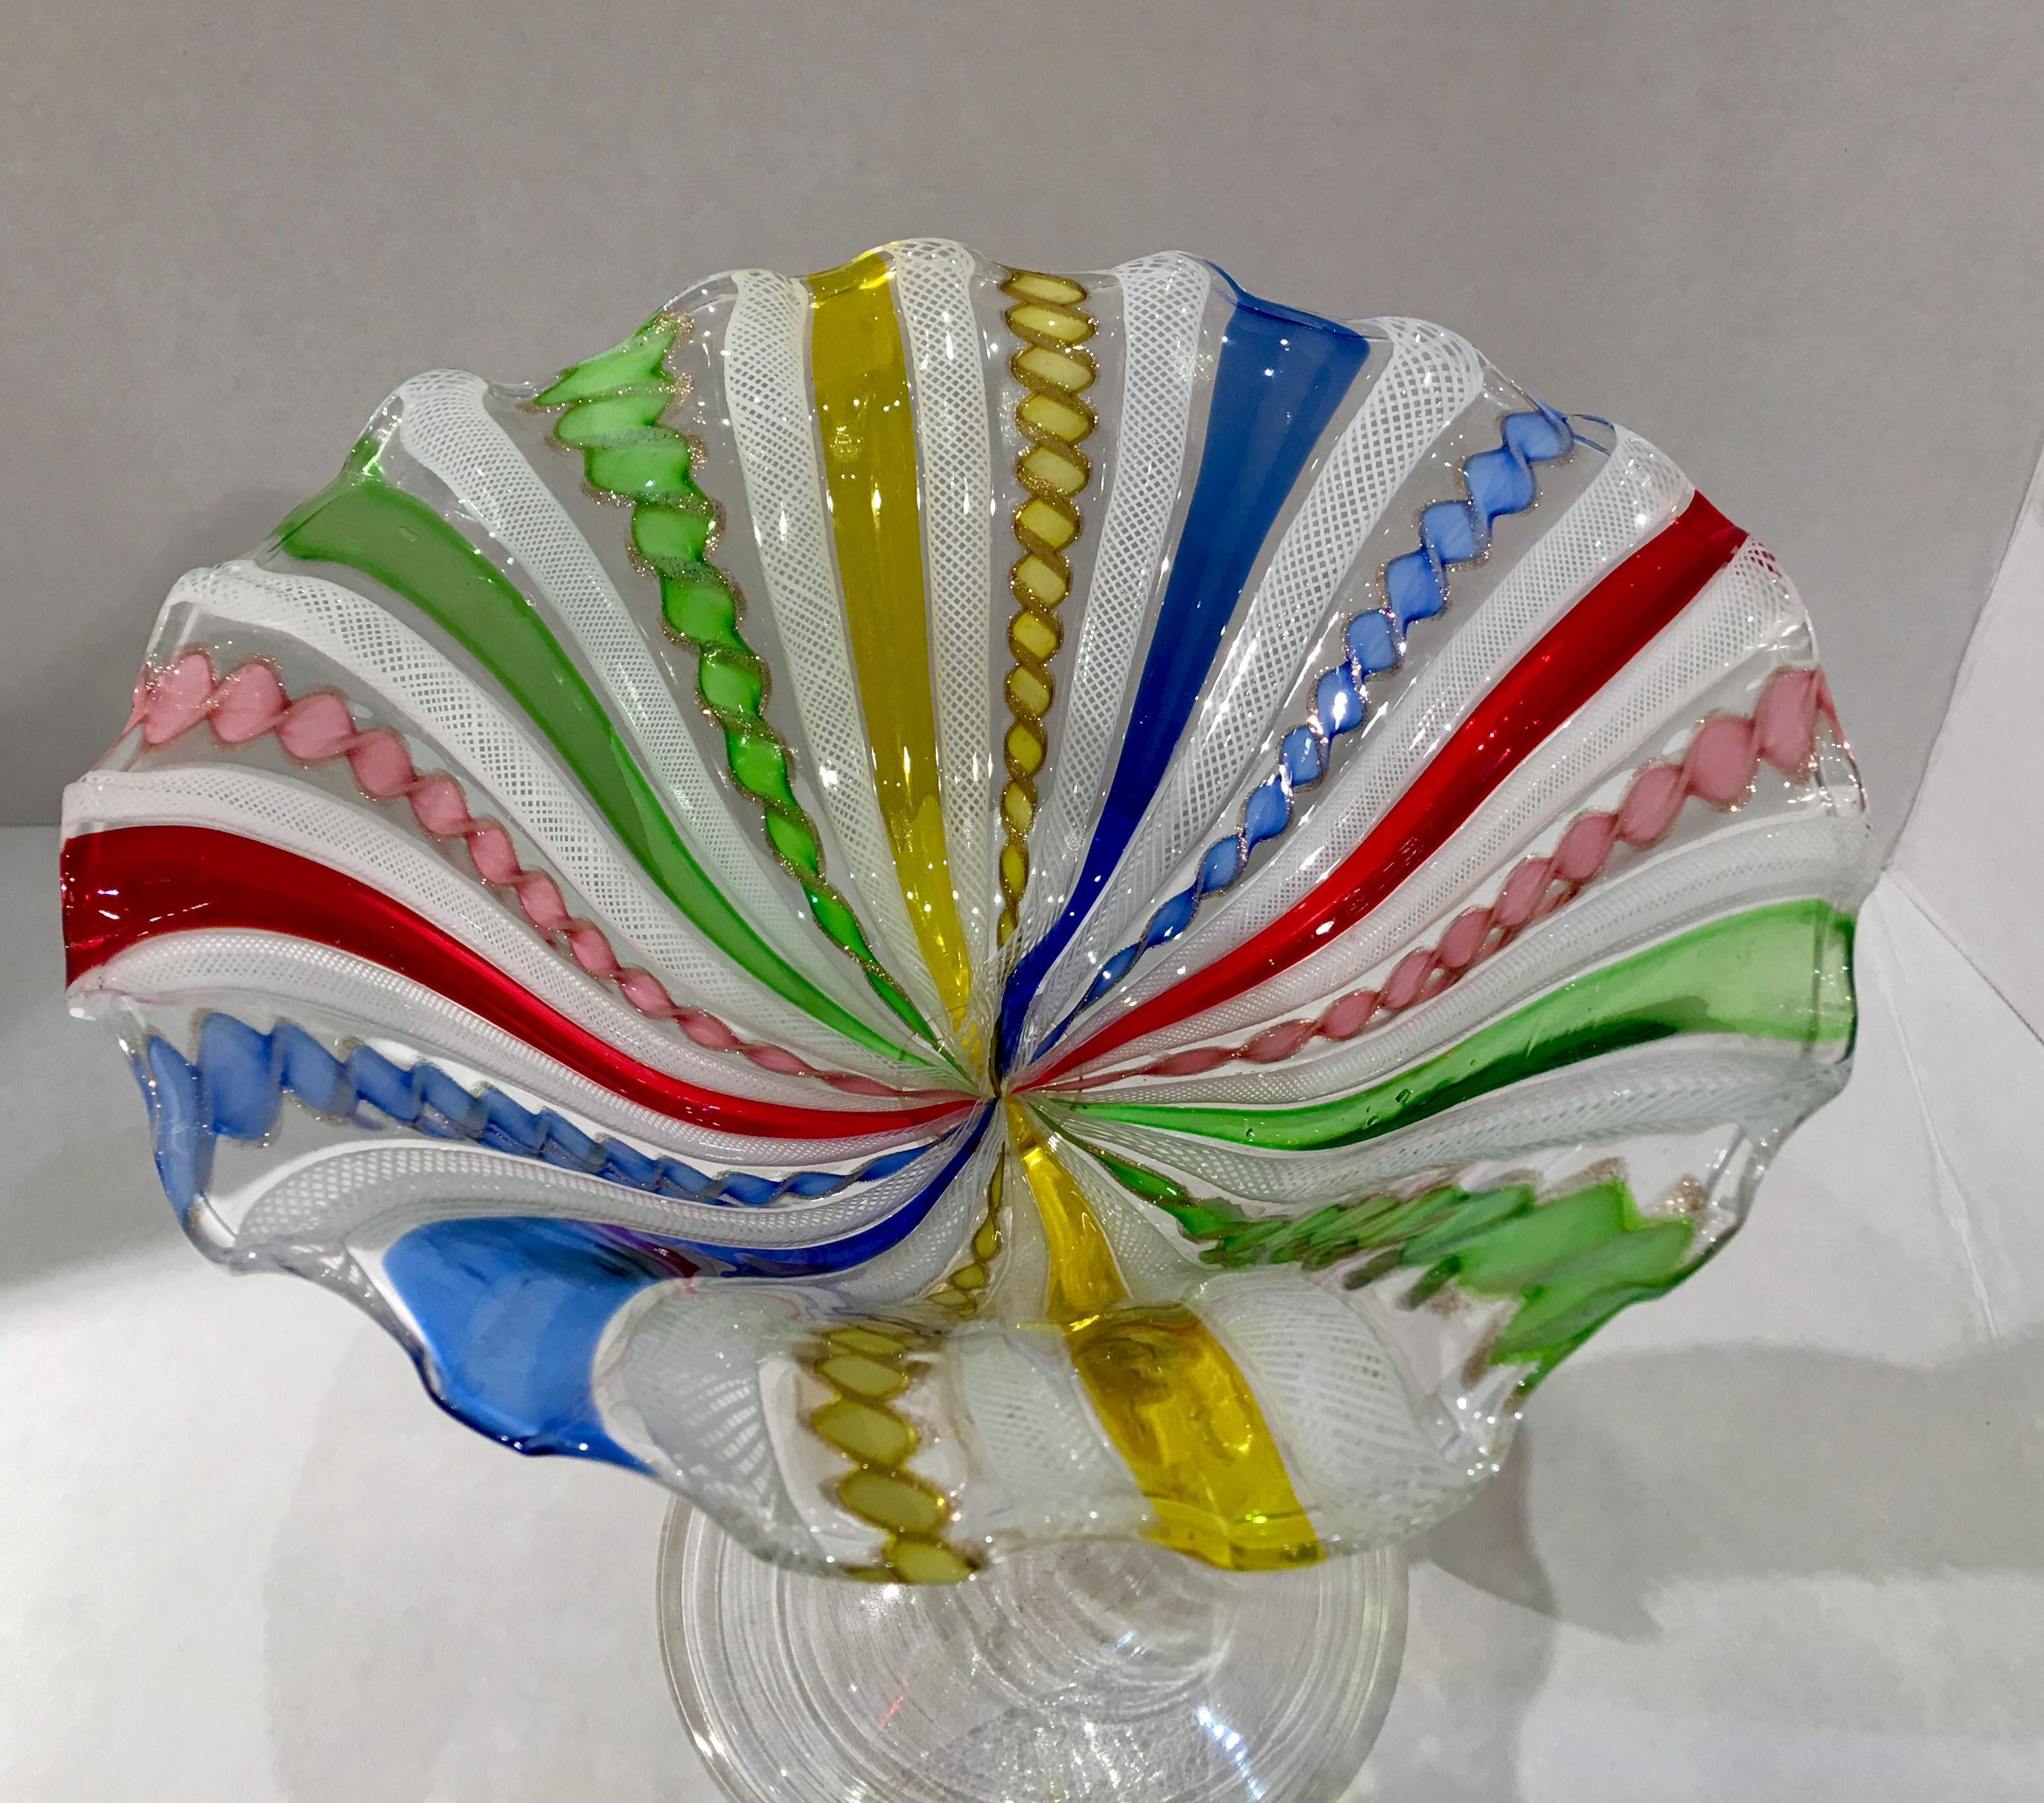 Pristine, handmade antique ruffled compote dish with a graceful swan stem from the Venetian island of Murano in Northern Italy, features white latticino ribbons or zanfirico canes, alternating with brilliantly colored ribbons of solid color and